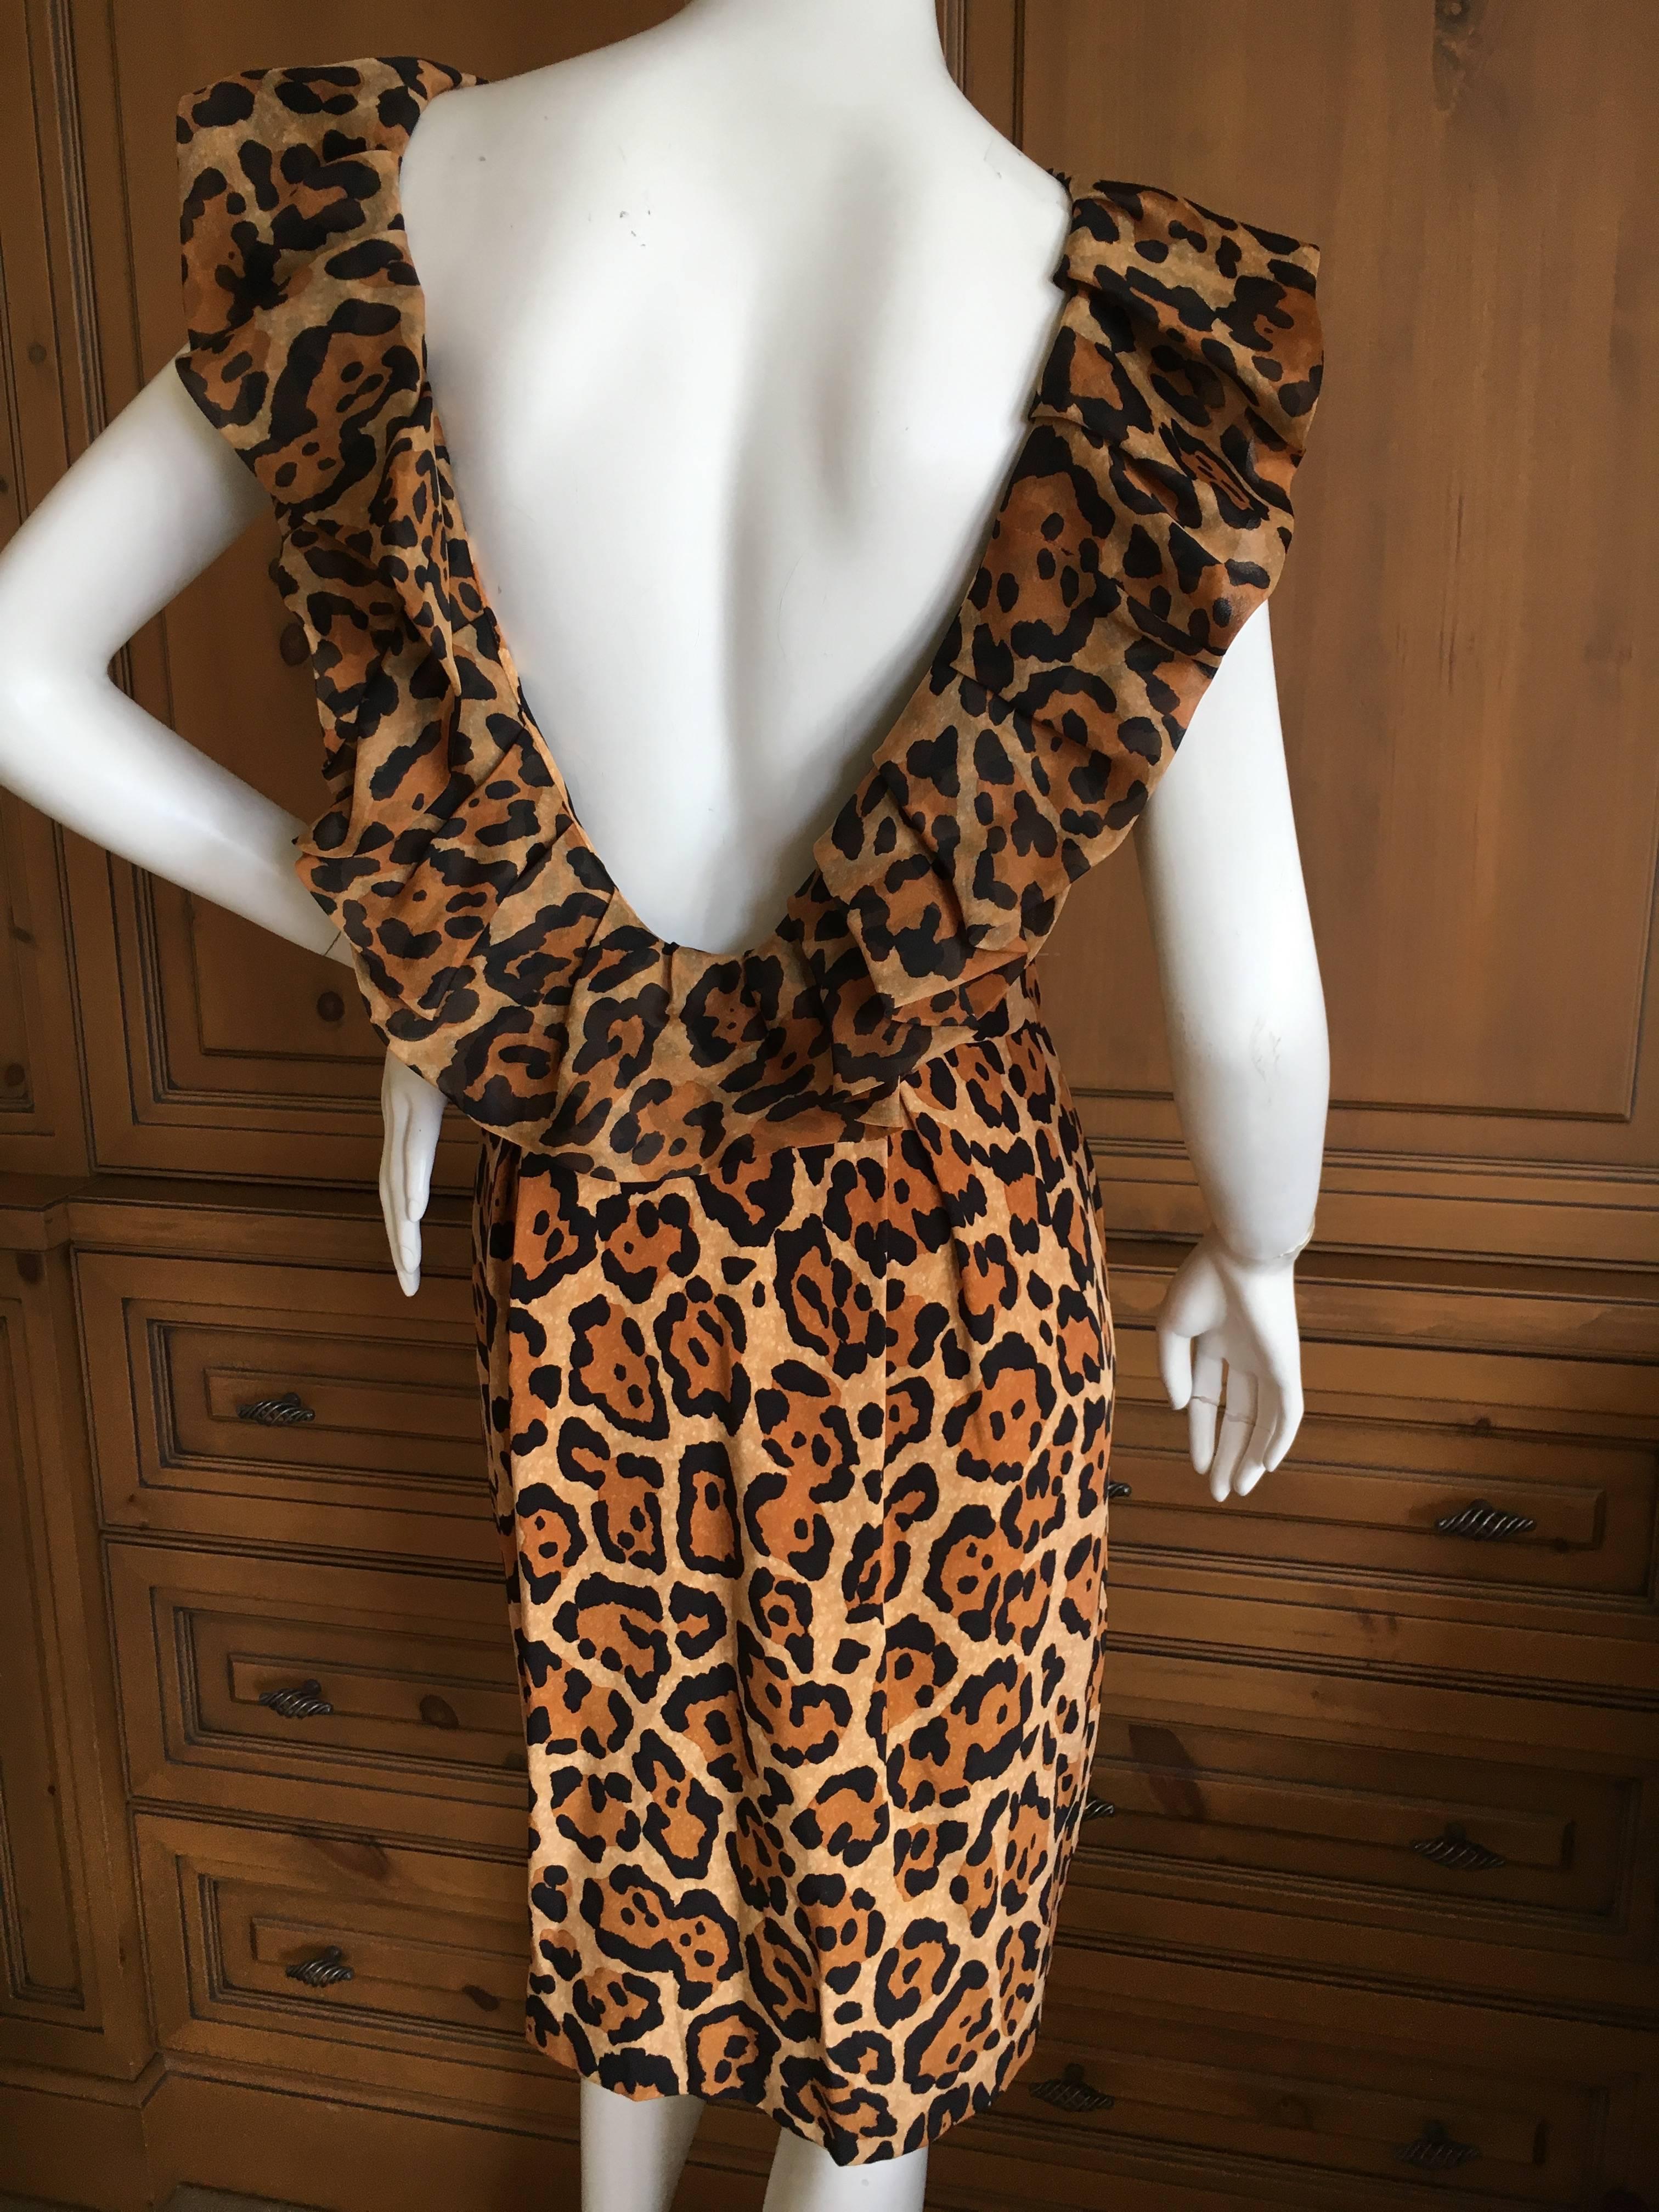 Christian Dior Backless Ruffled Leopard Print Silk Cocktail Dress by John Galliano.
This is exquisite.
Size 40
Bust 38"
Waist 28"
Hips 40"
Length 40"
Excellent condition